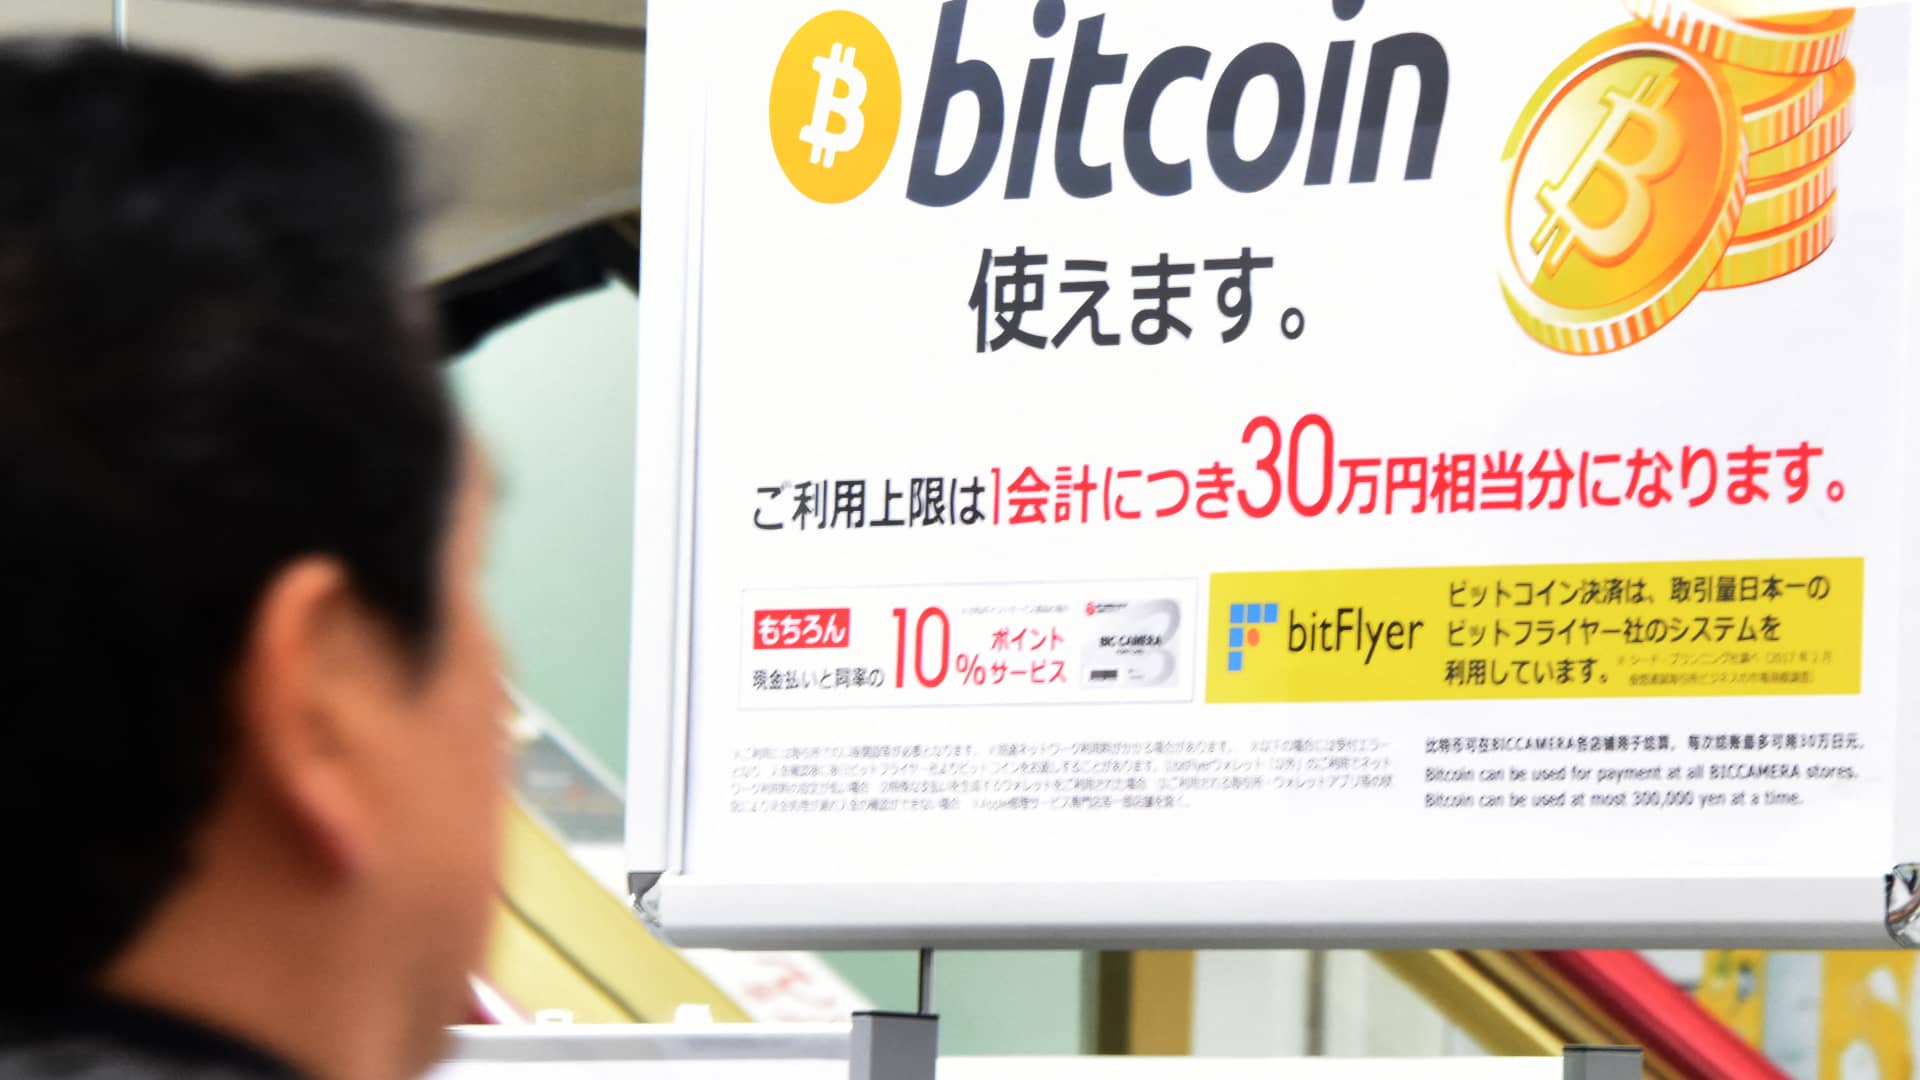 World's largest pension fund explores bitcoin as an investment